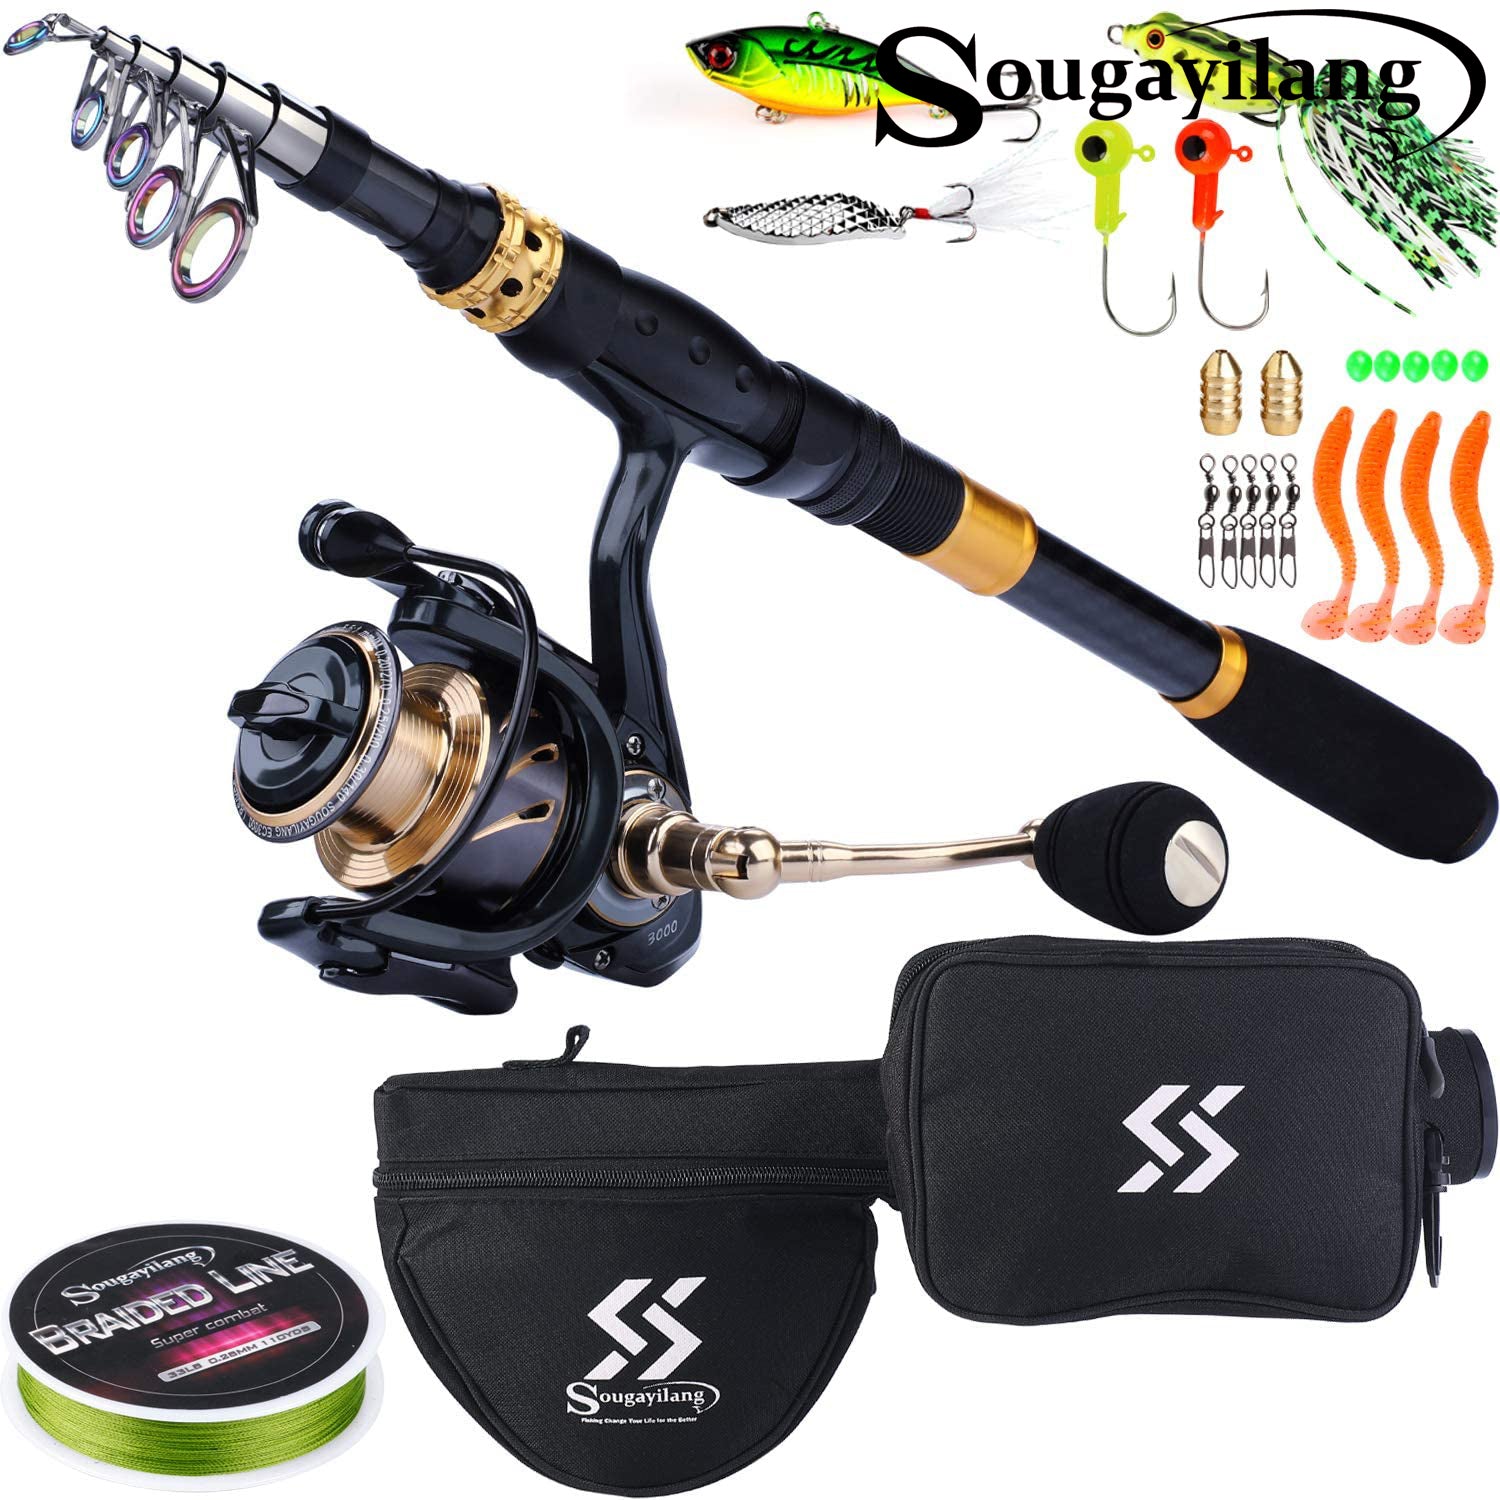 Sougayilang Telescopic Fishing Rod and Reel Combo Spinning Pole - Spinning Reels for Travel Fishing, Size: 2.1m and XY2000